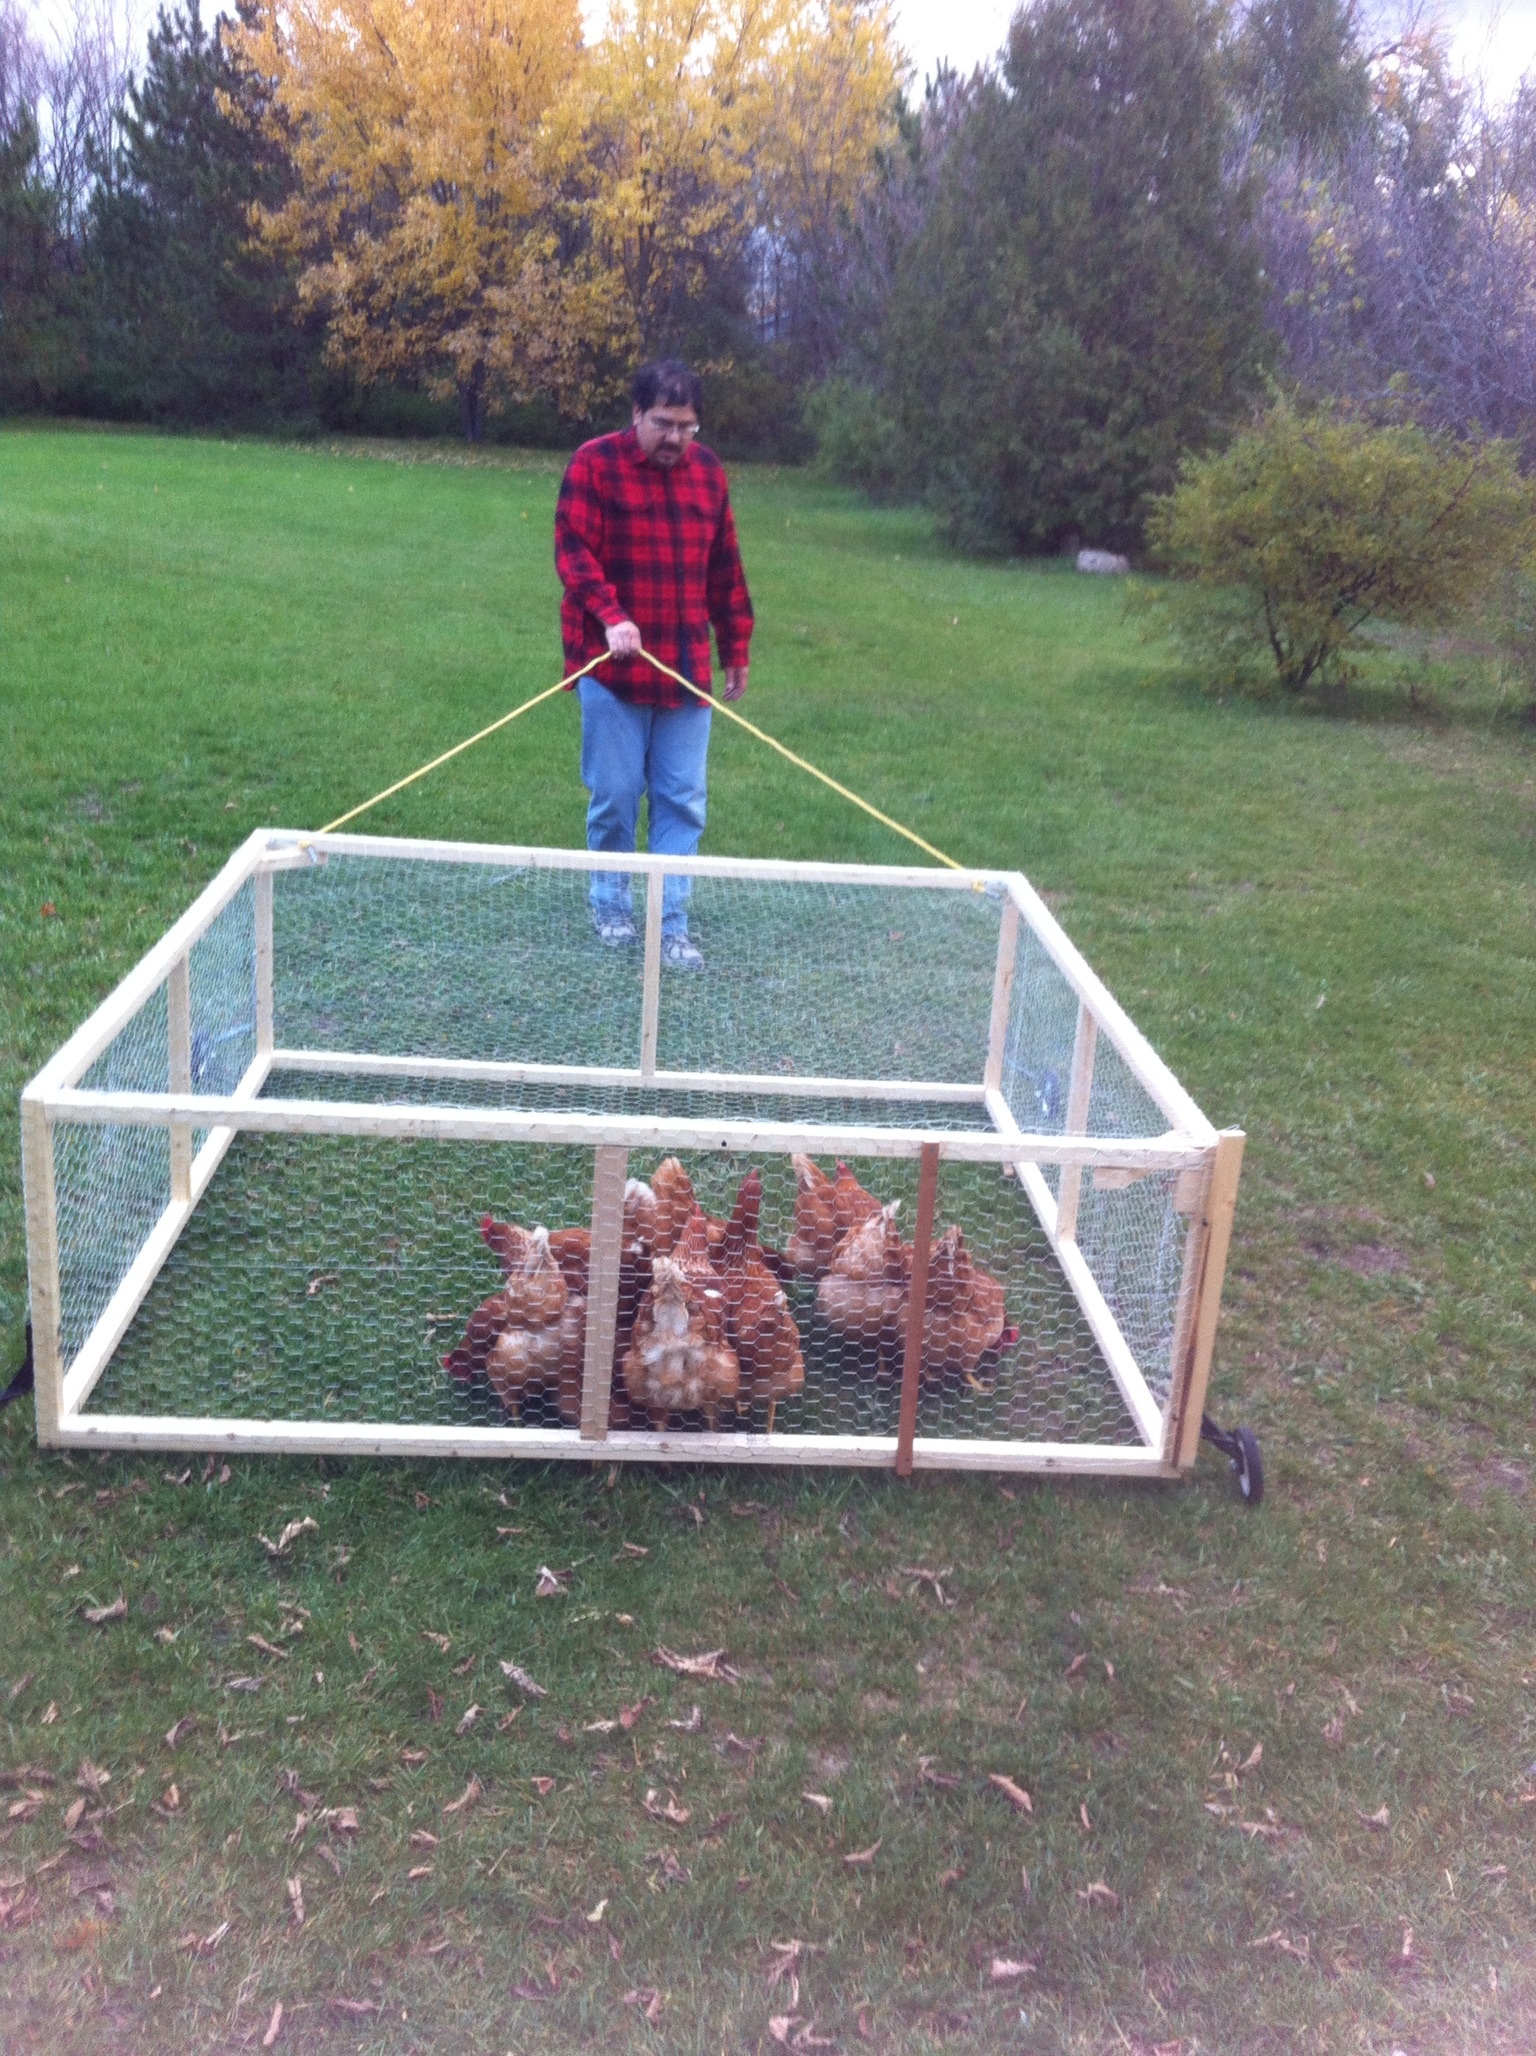 6x6x2 made with 2x2s and 1" mesh wire. We used old training wheels from the kids' bikes we had stashed in the garage and a nylon rope to pull it to and fro.
It works pretty well and I can move the girls around pretty easily in it.  Now if I could just get them to go back into the coop when play time is over!  :-/